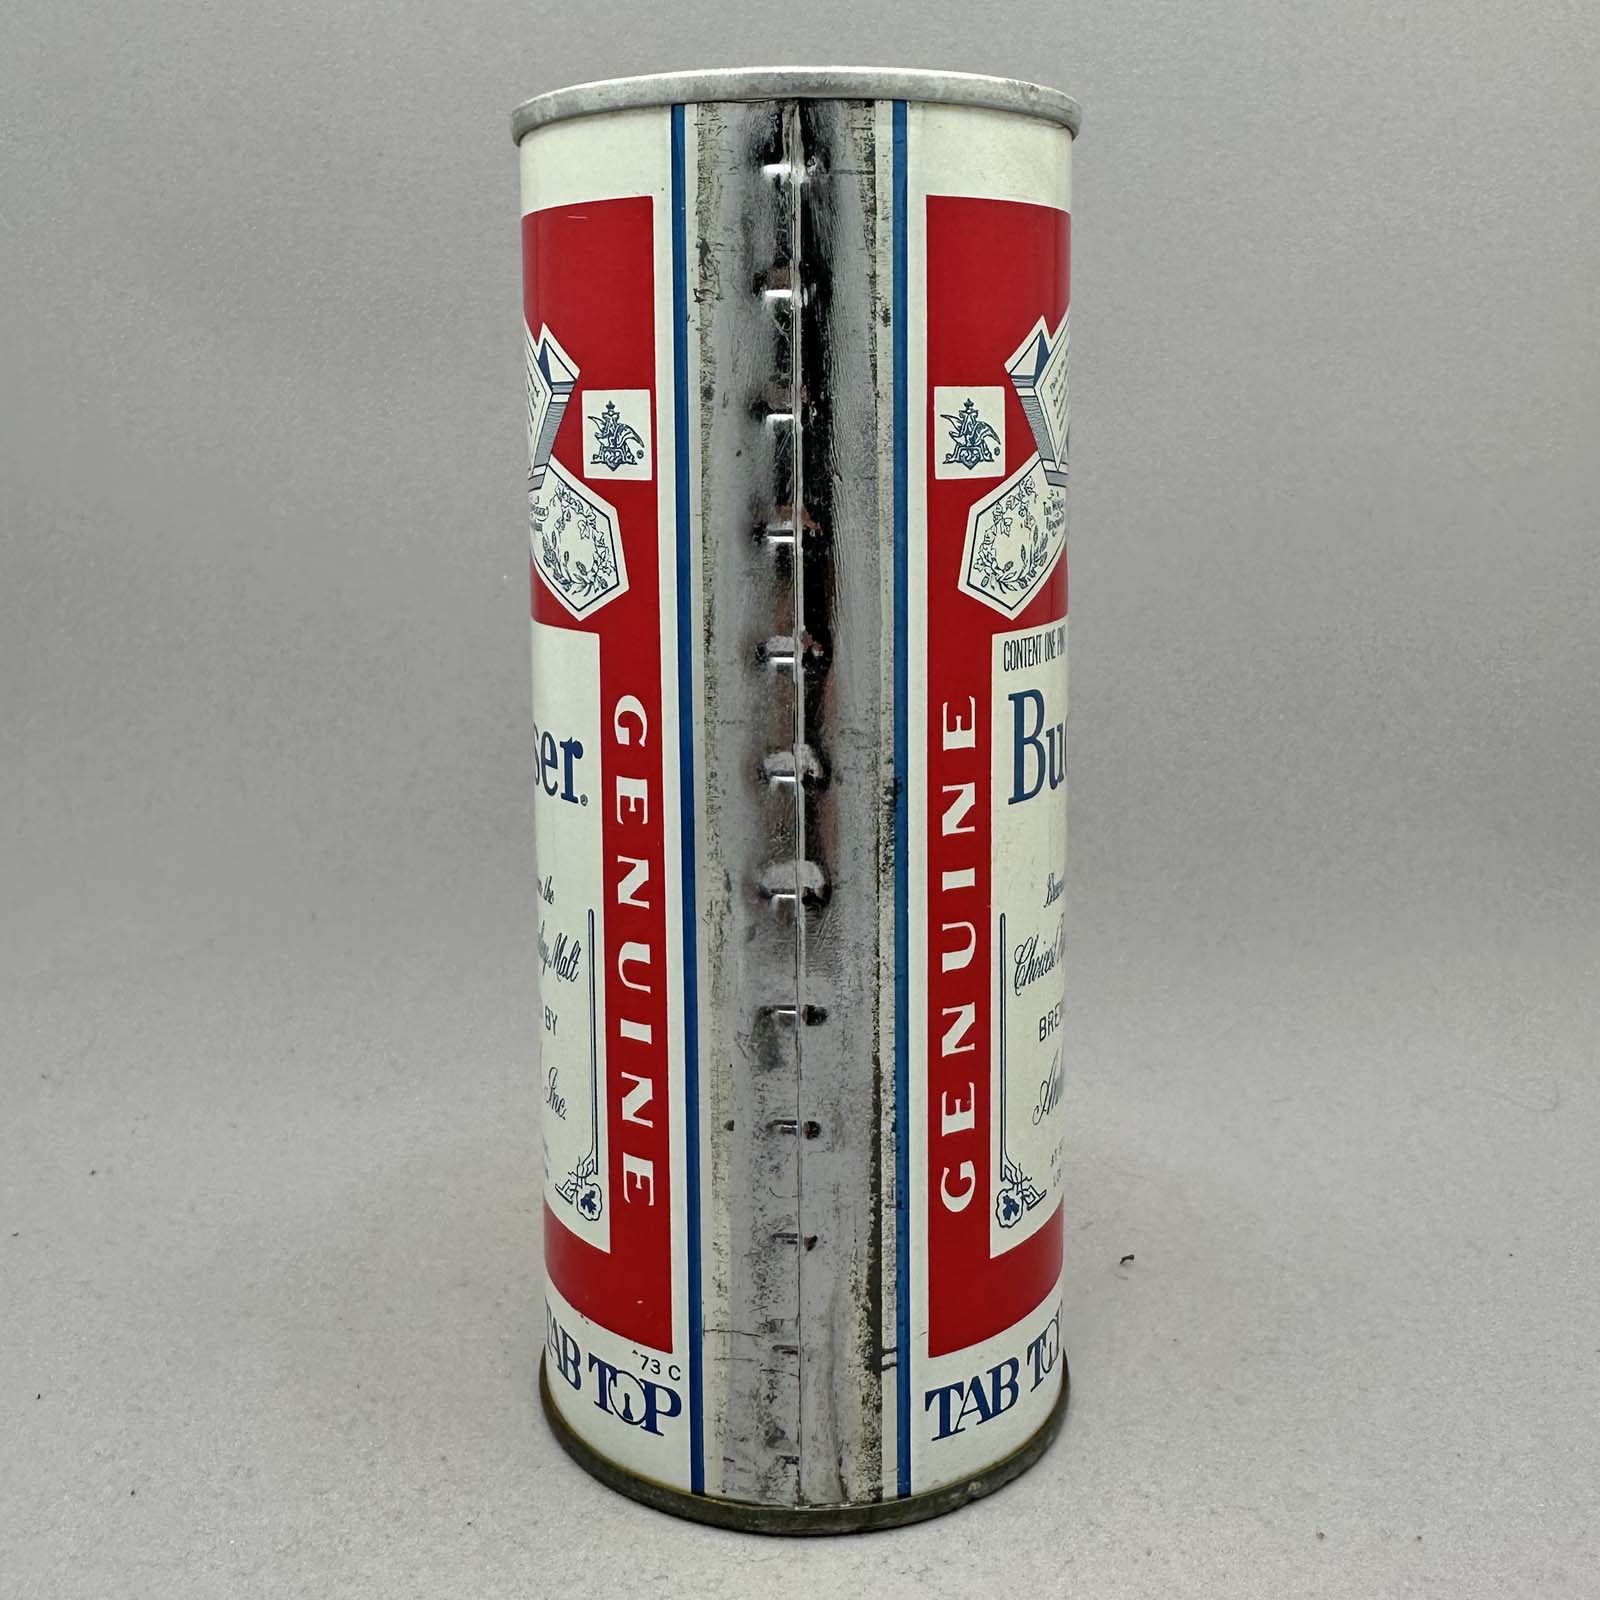 budweiser 143-6 pull tab beer can 2